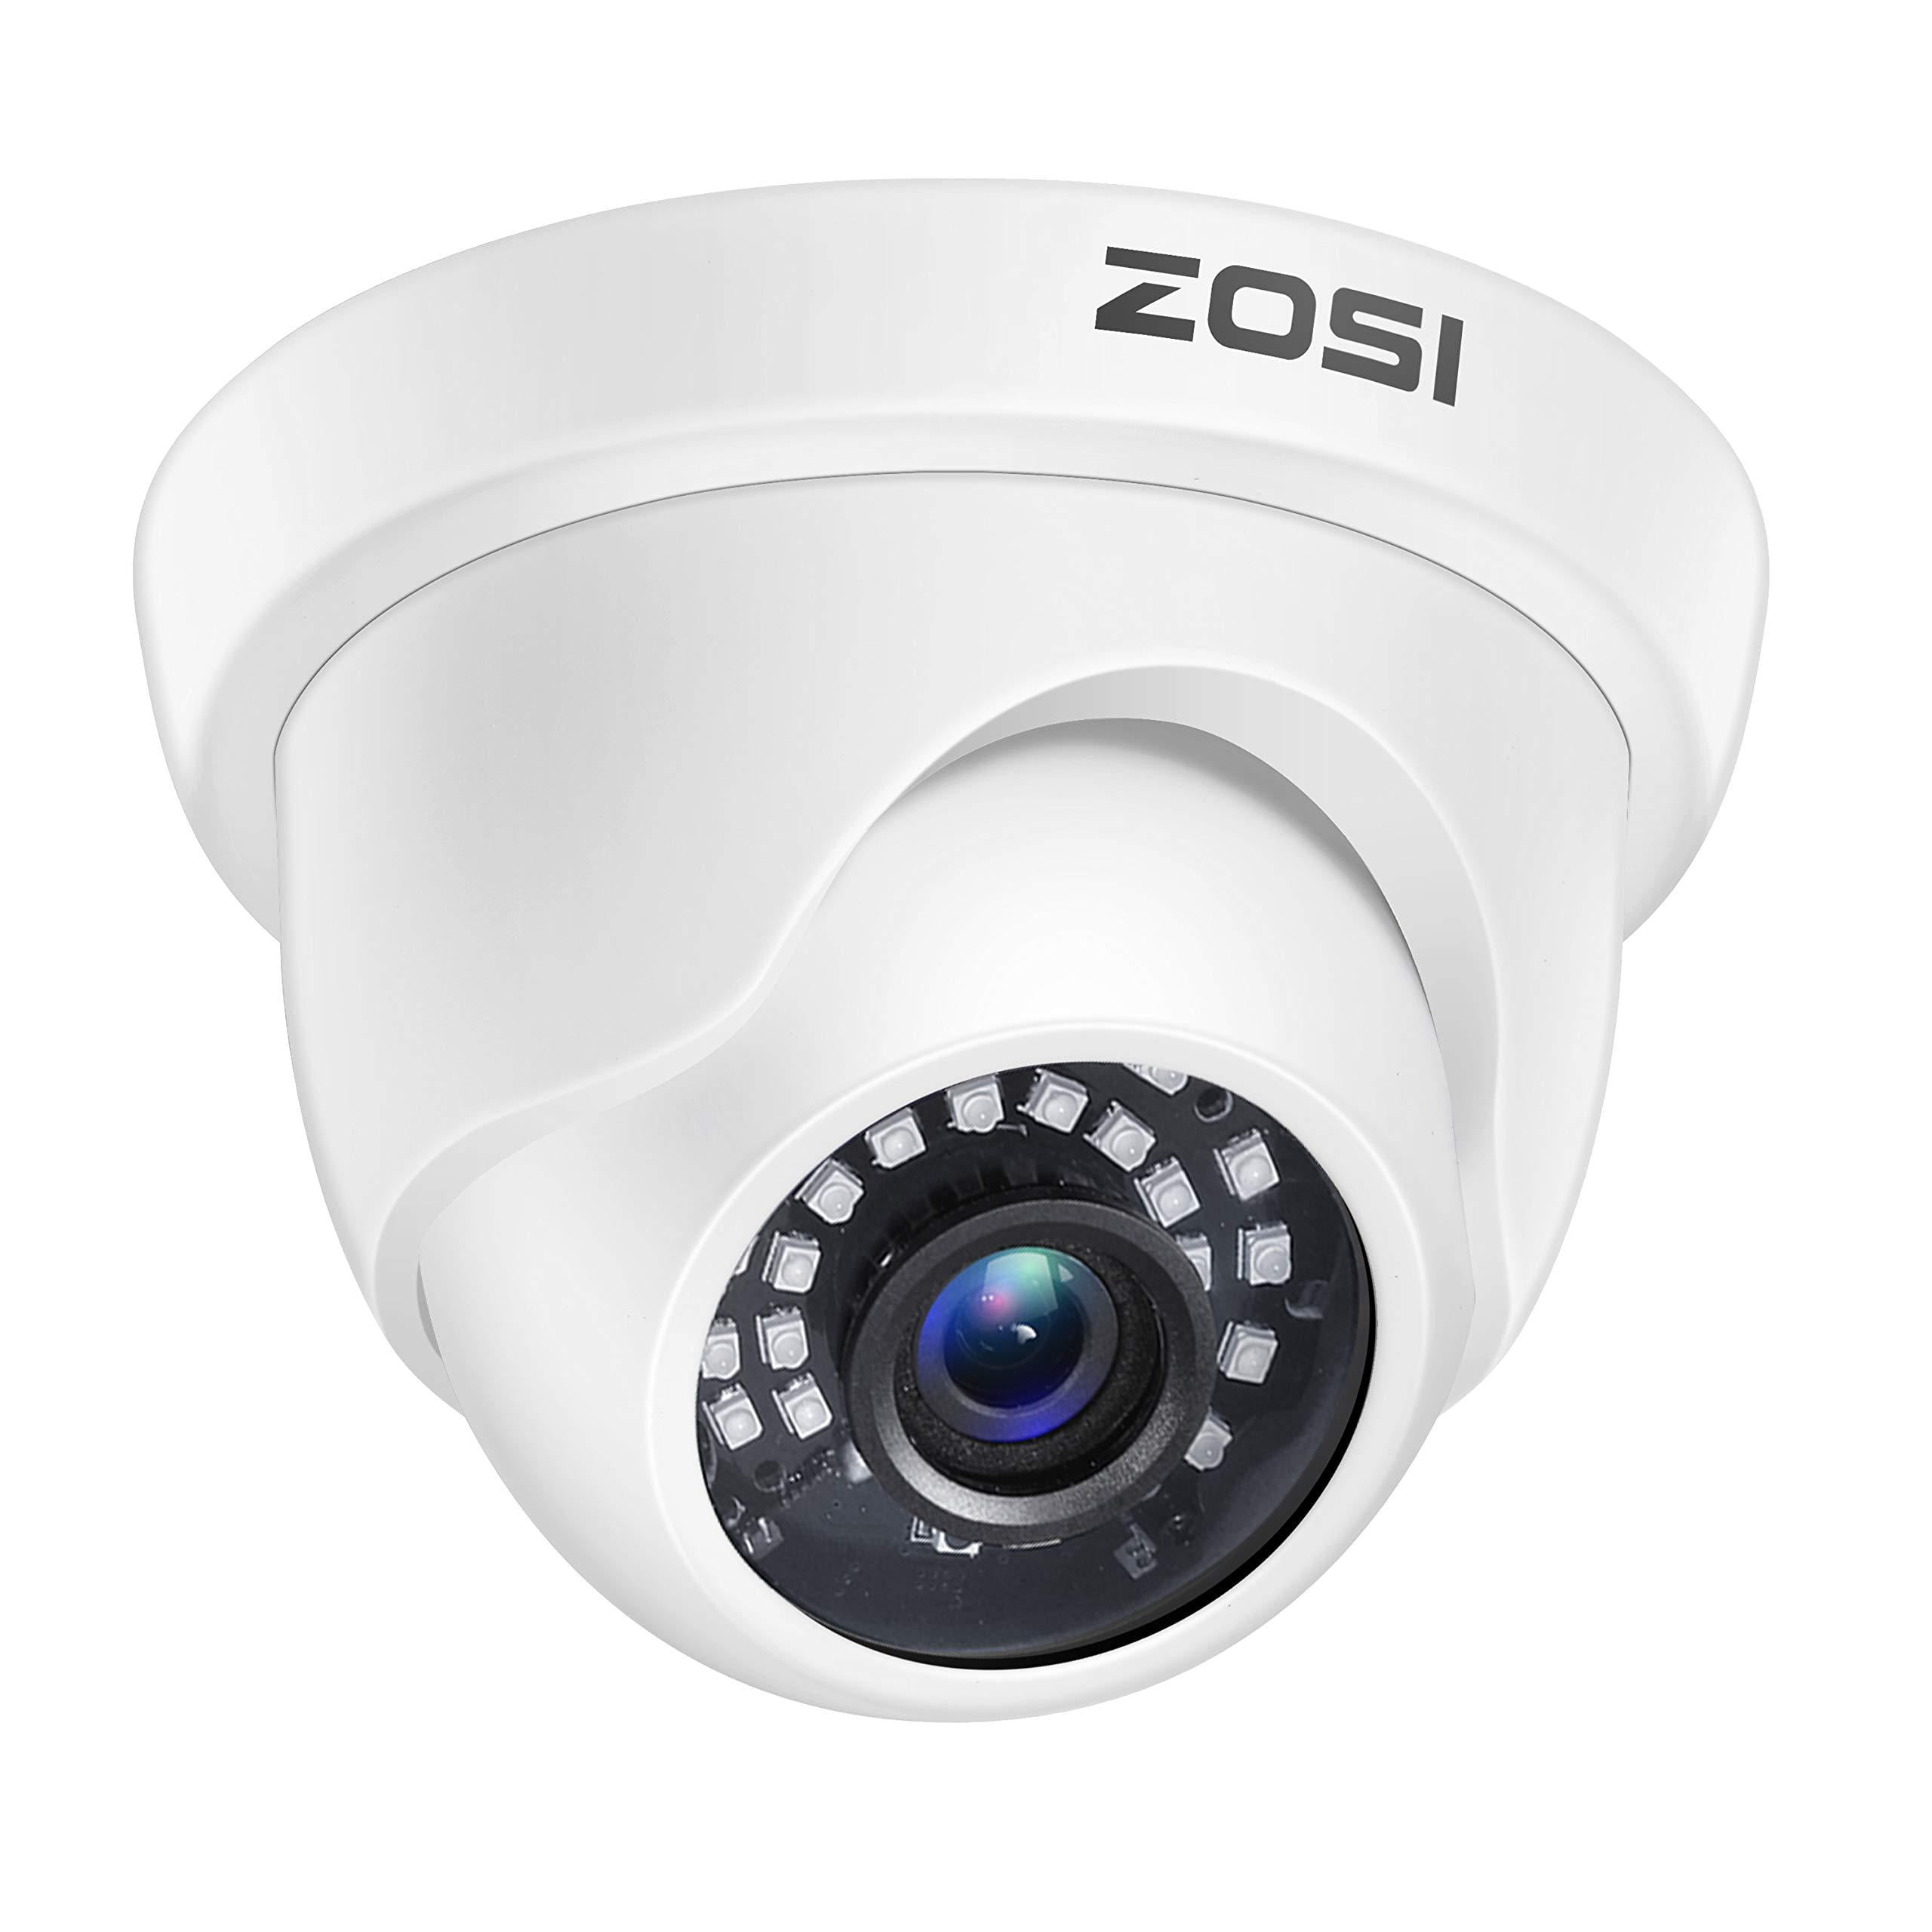 Hybrid 4-in-1 HD-CVI/TVI/AHD/960H Analog CVBS ZOSI 1080p Dome Security Cameras ,2MP Day Night Vision Weatherproof Dome Camera Outdoor/Indoor 